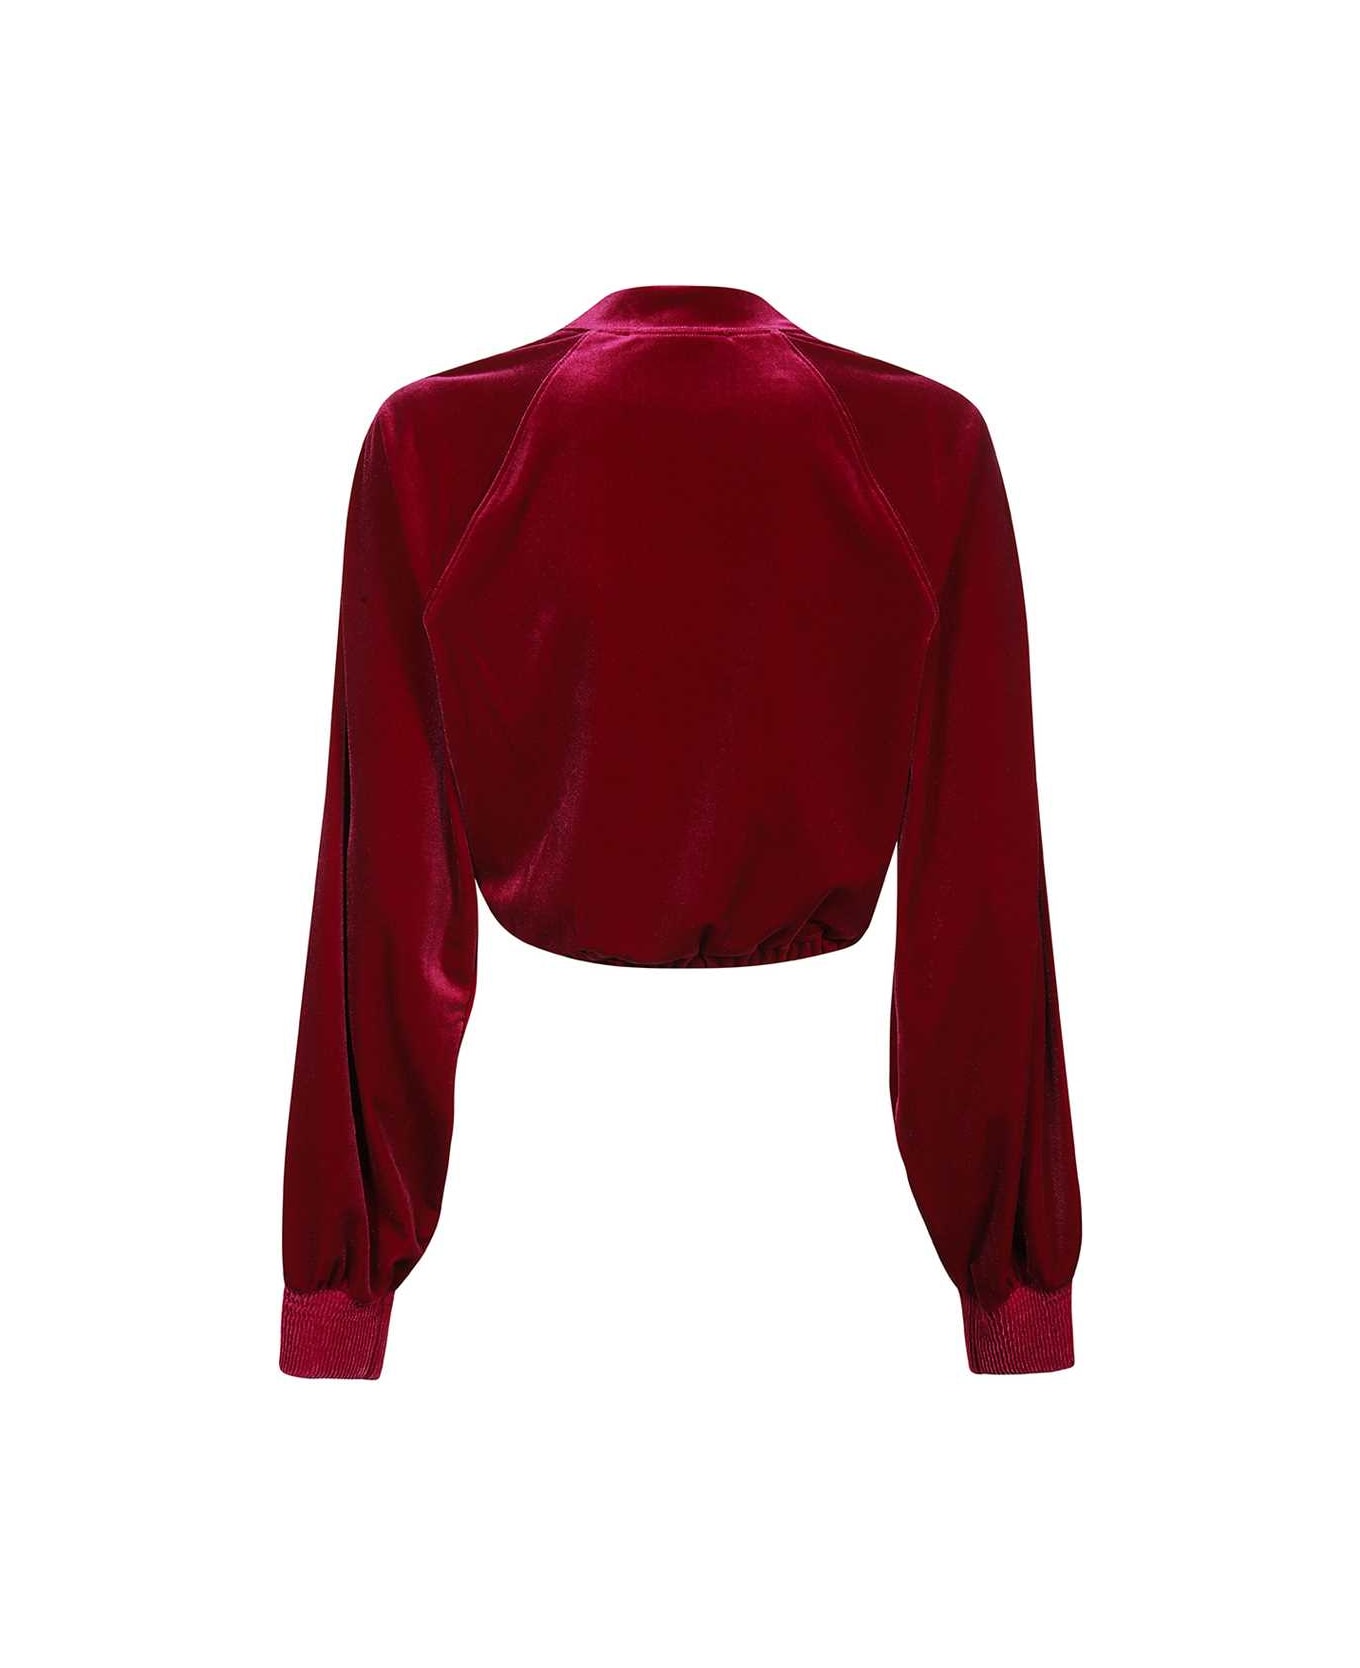 Versace Jeans Couture Cropped Sweatshirt - Burgundy フリース